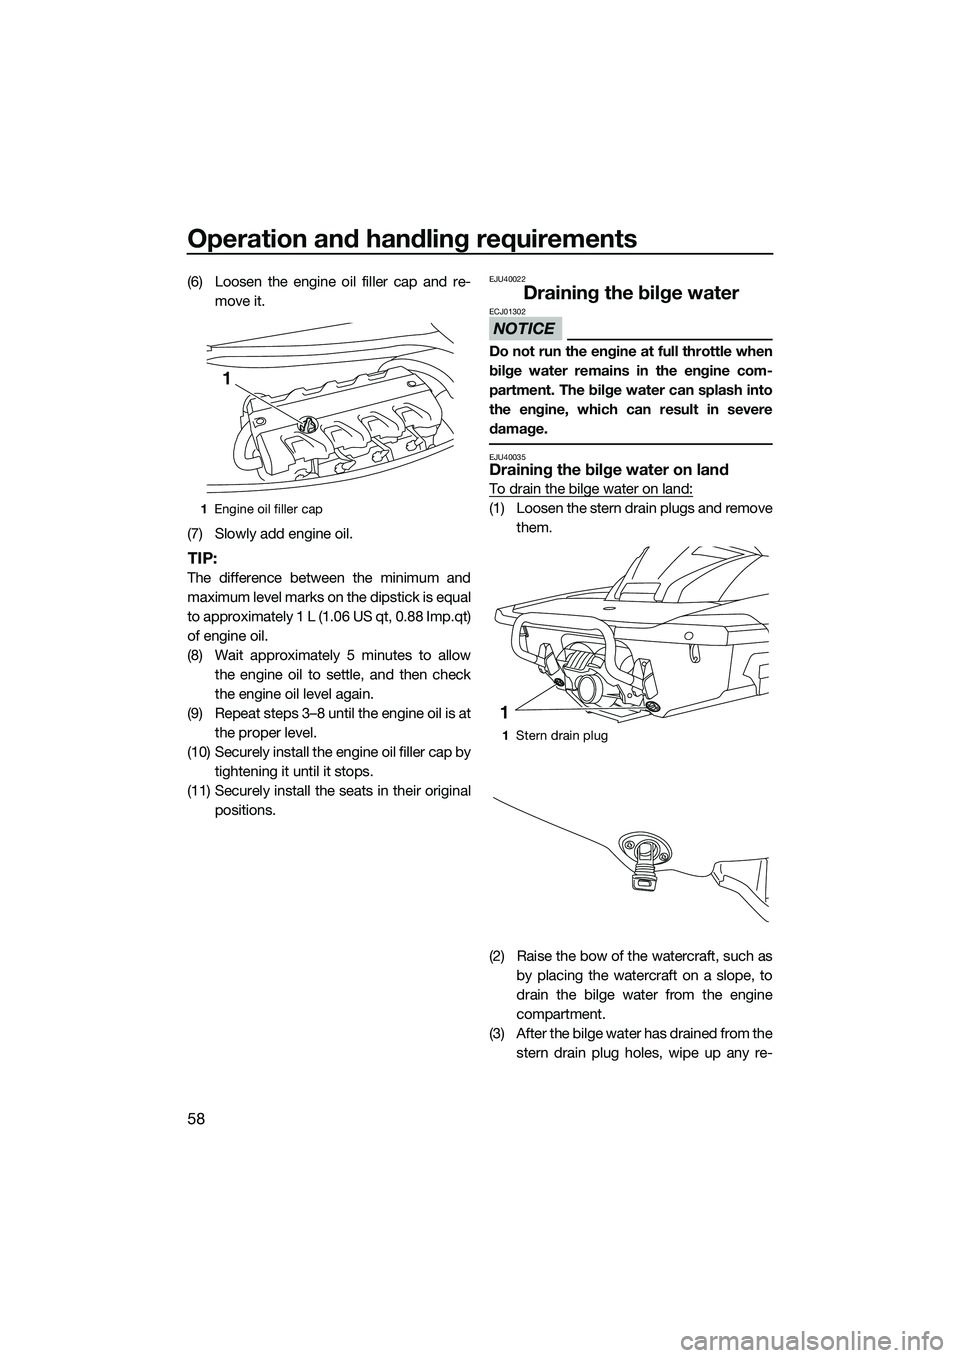 YAMAHA FX HO CRUISER 2014  Owners Manual Operation and handling requirements
58
(6) Loosen the engine oil filler cap and re-move it.
(7) Slowly add engine oil.
TIP:
The difference between the minimum and
maximum level marks on the dipstick i